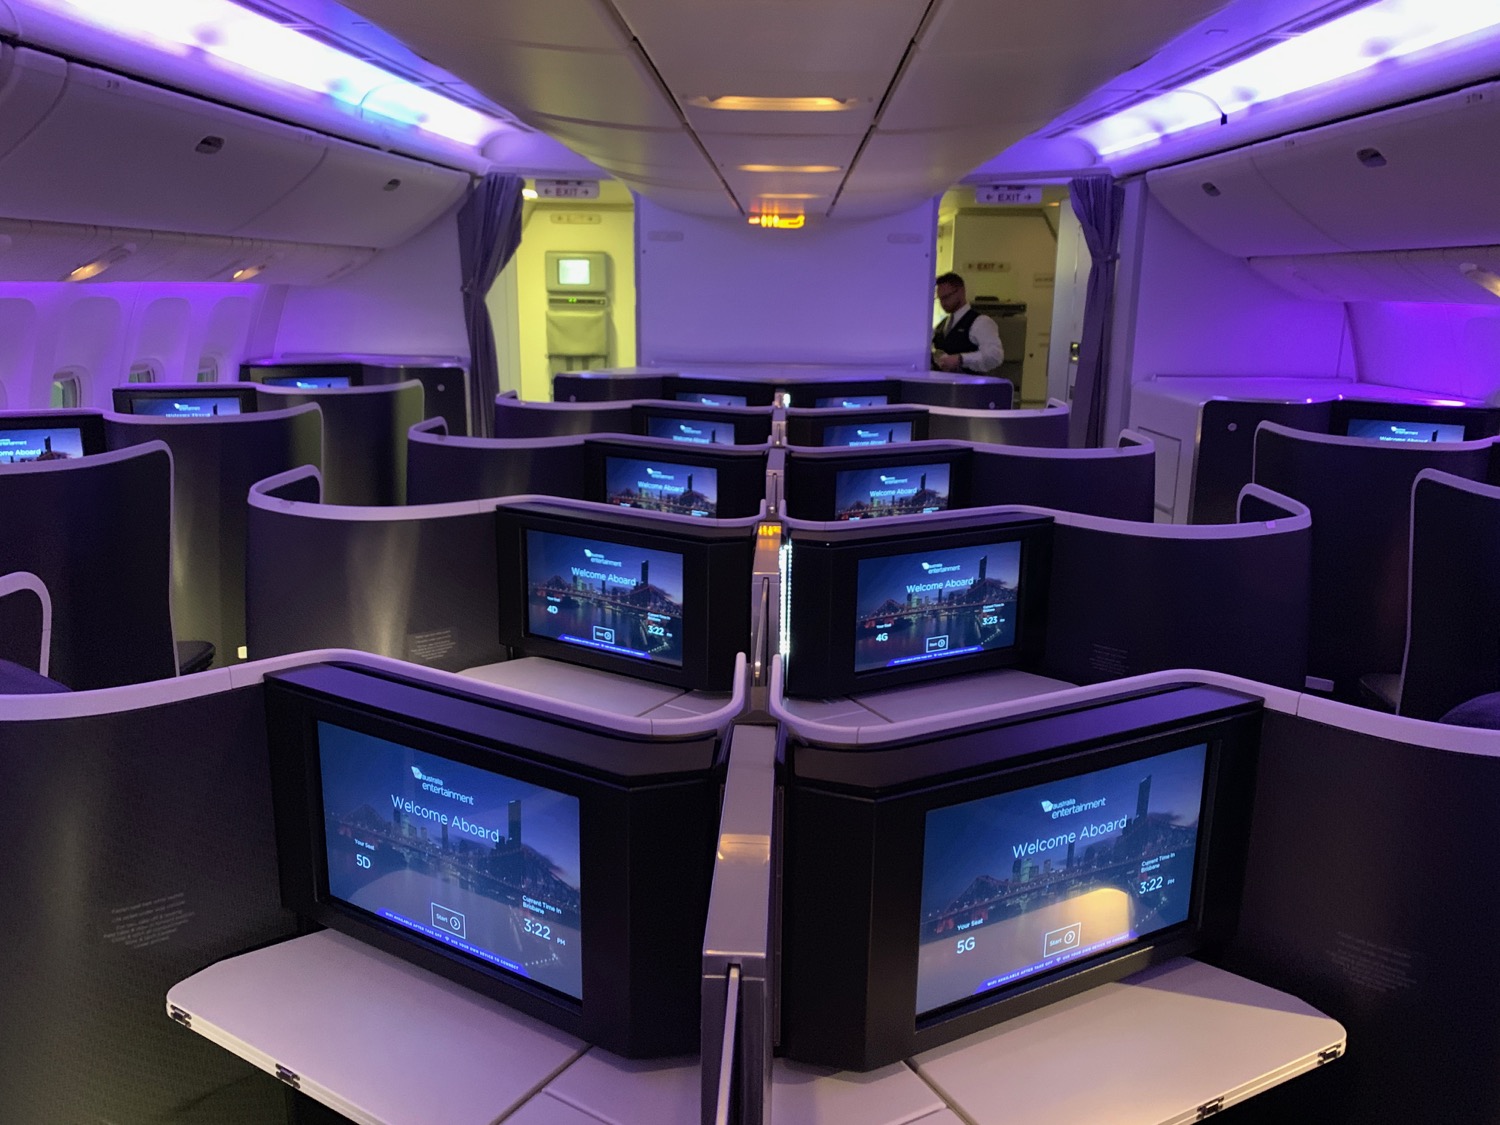 a row of televisions in an airplane